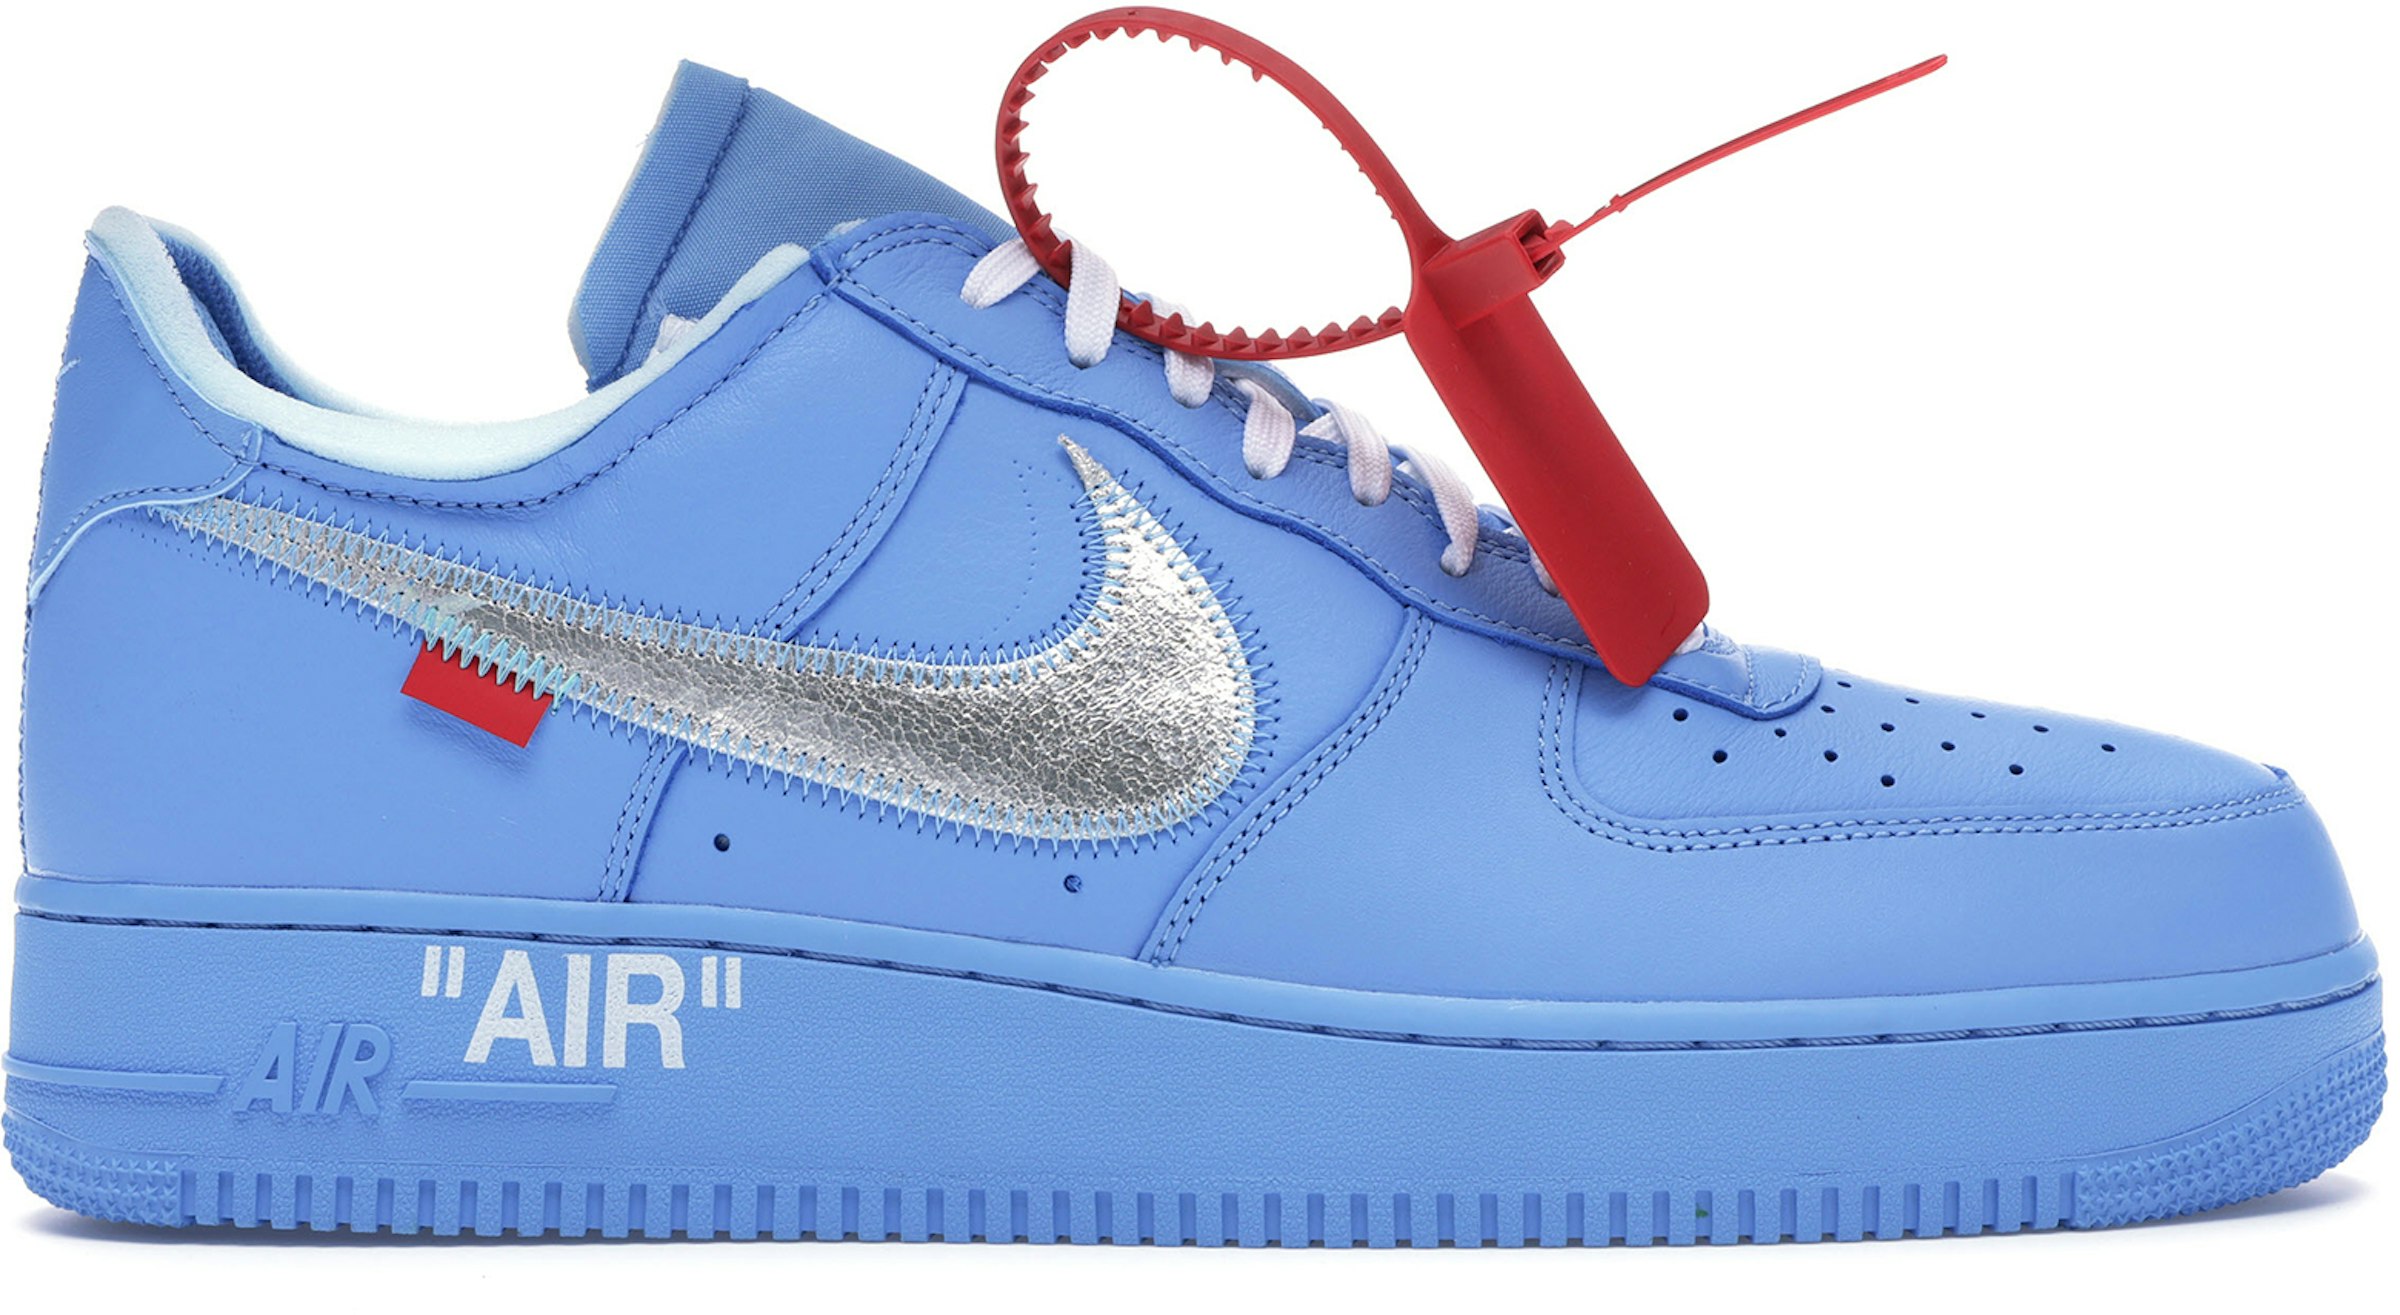 Gobernable cartucho liebre Buy Nike Air Force 1 OFF-WHITE Shoes & New Sneakers - StockX